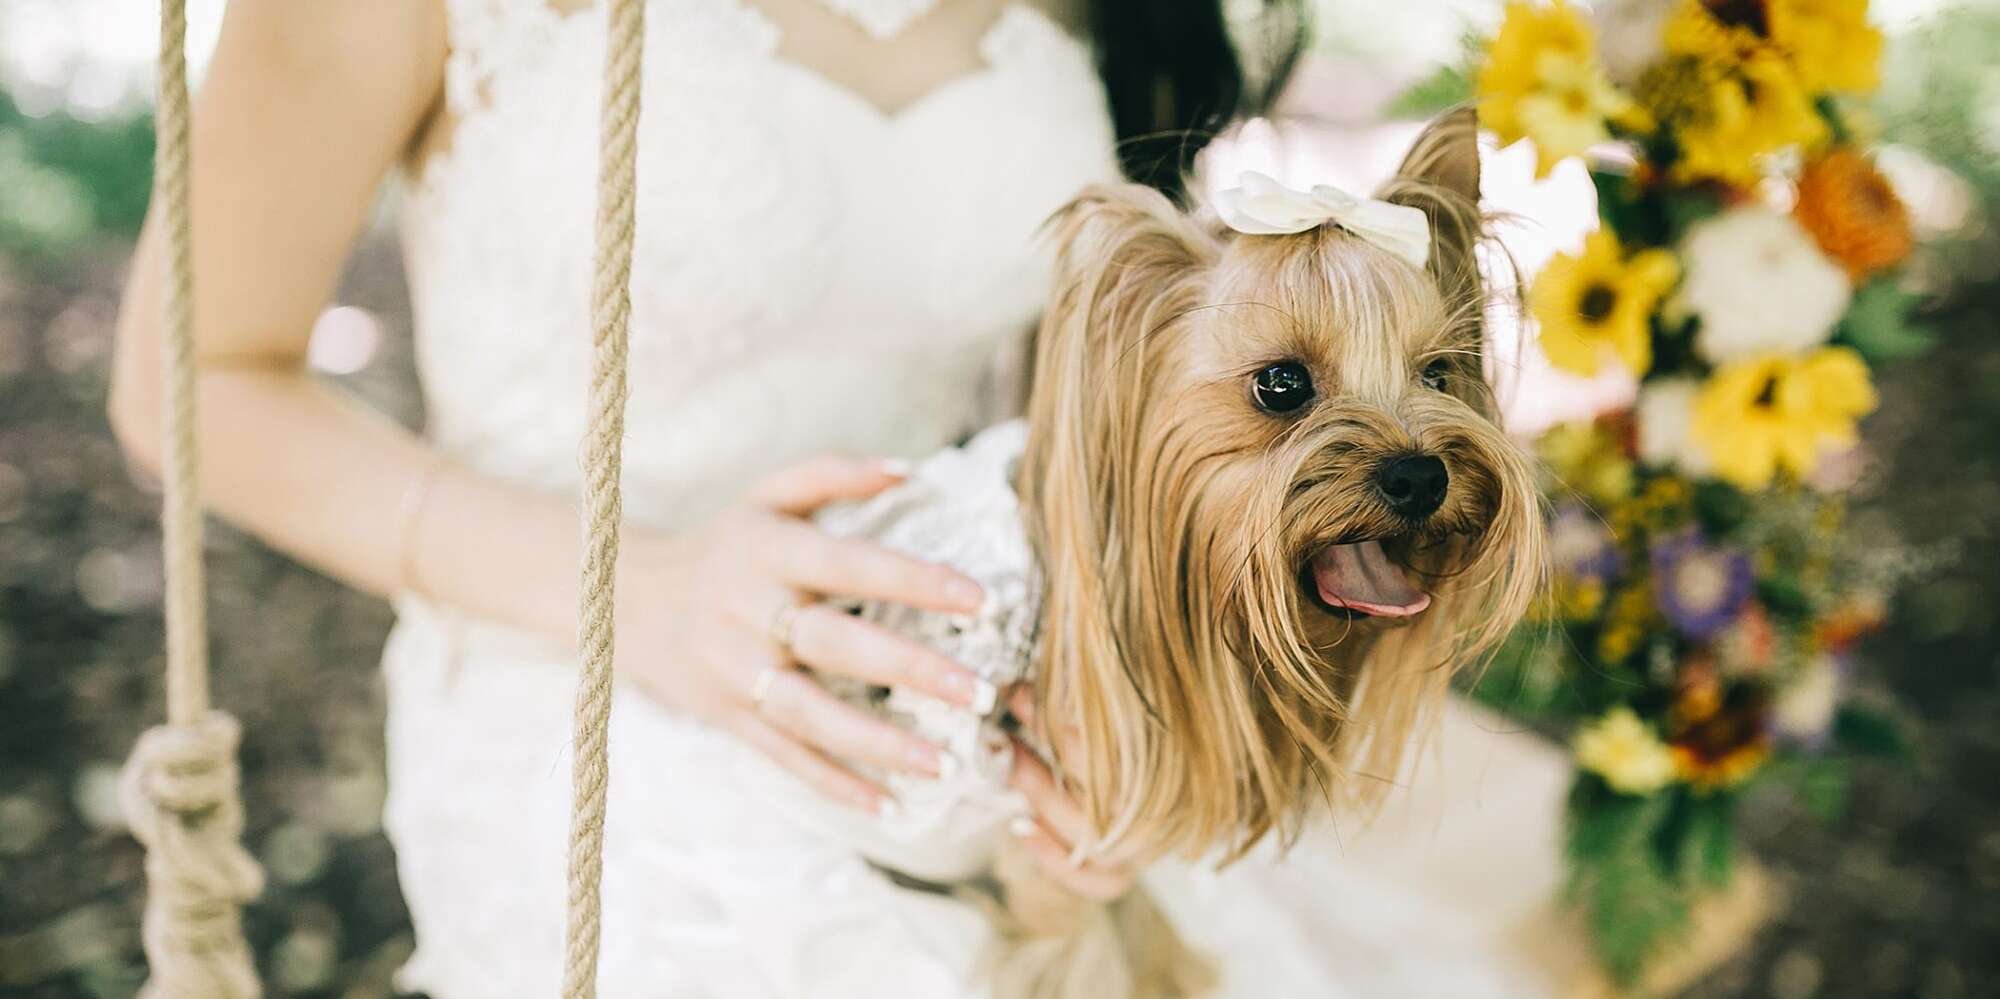 15 Times Dapper Dogs in Wedding Attire Almost Outshined the Happy Couple